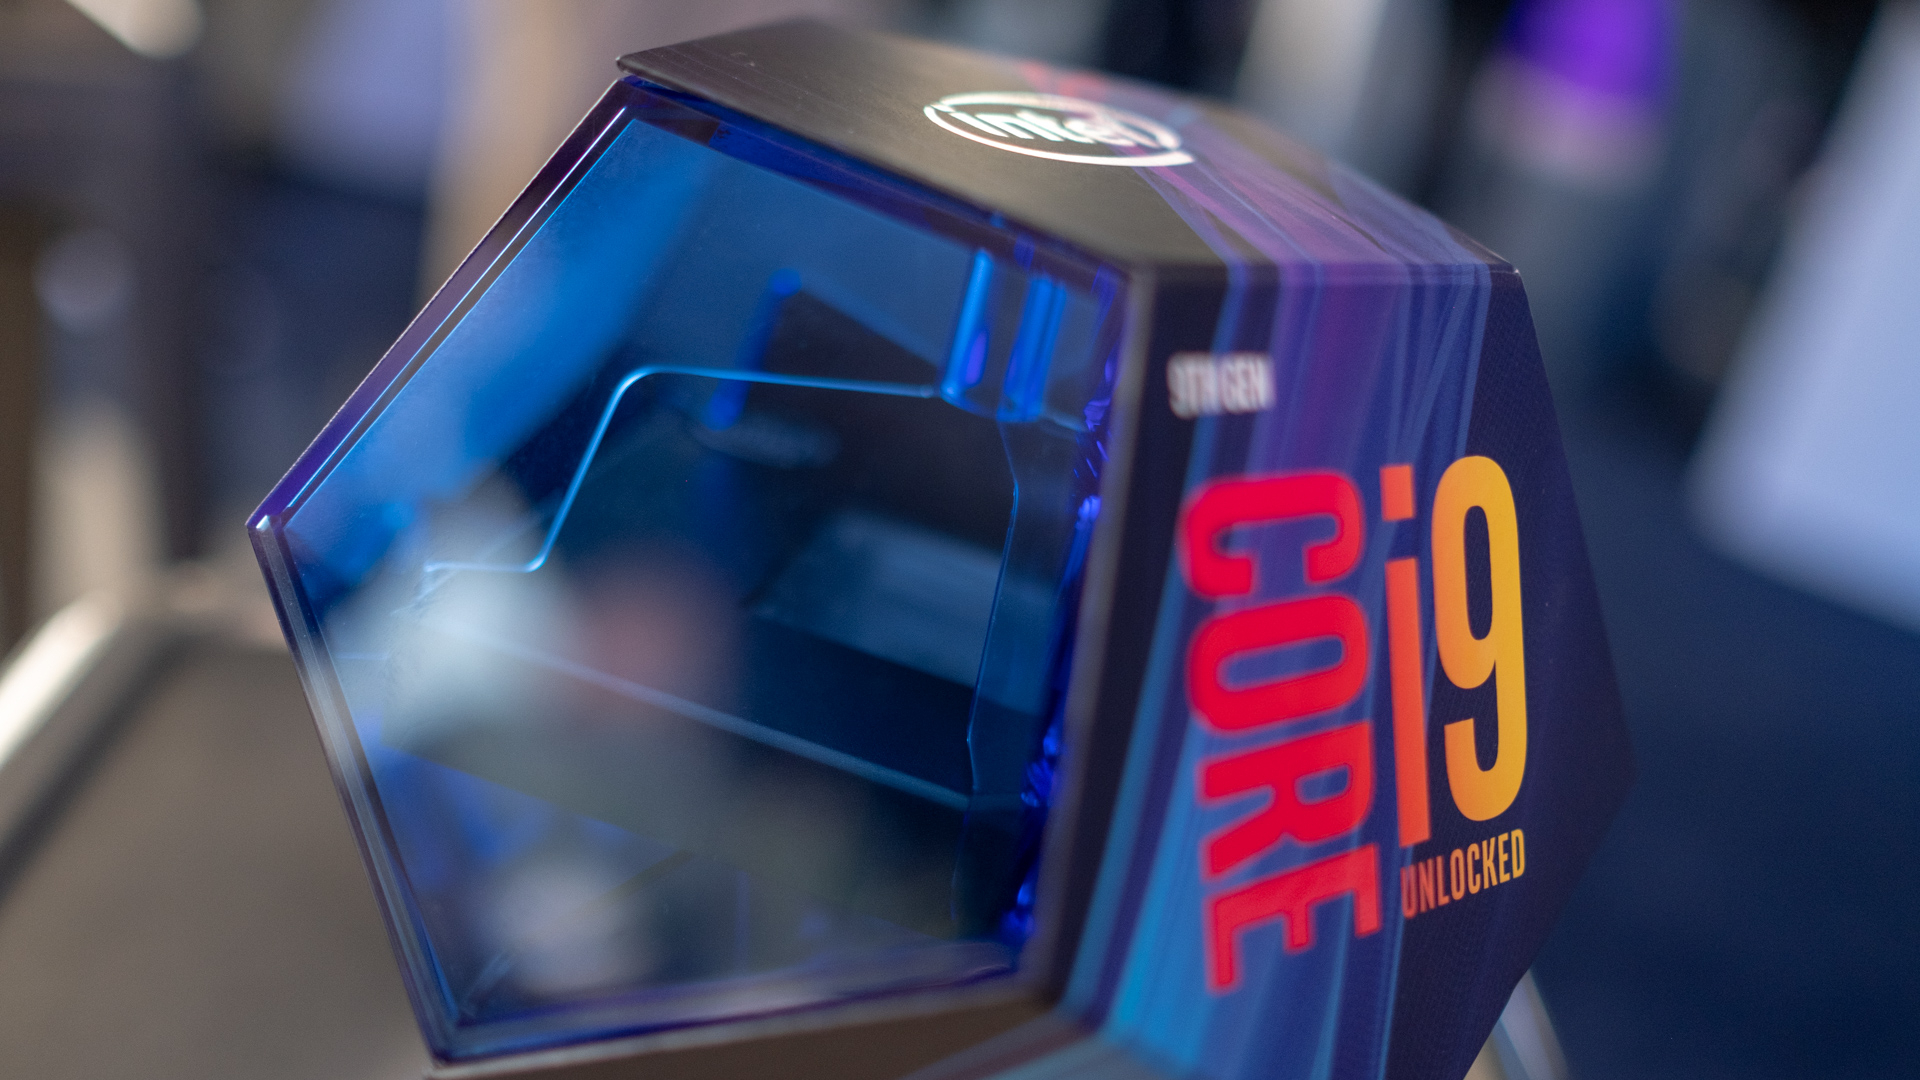 Intel Core I9-9900Ks Can Hit A 5.2Ghz Overclock – But The